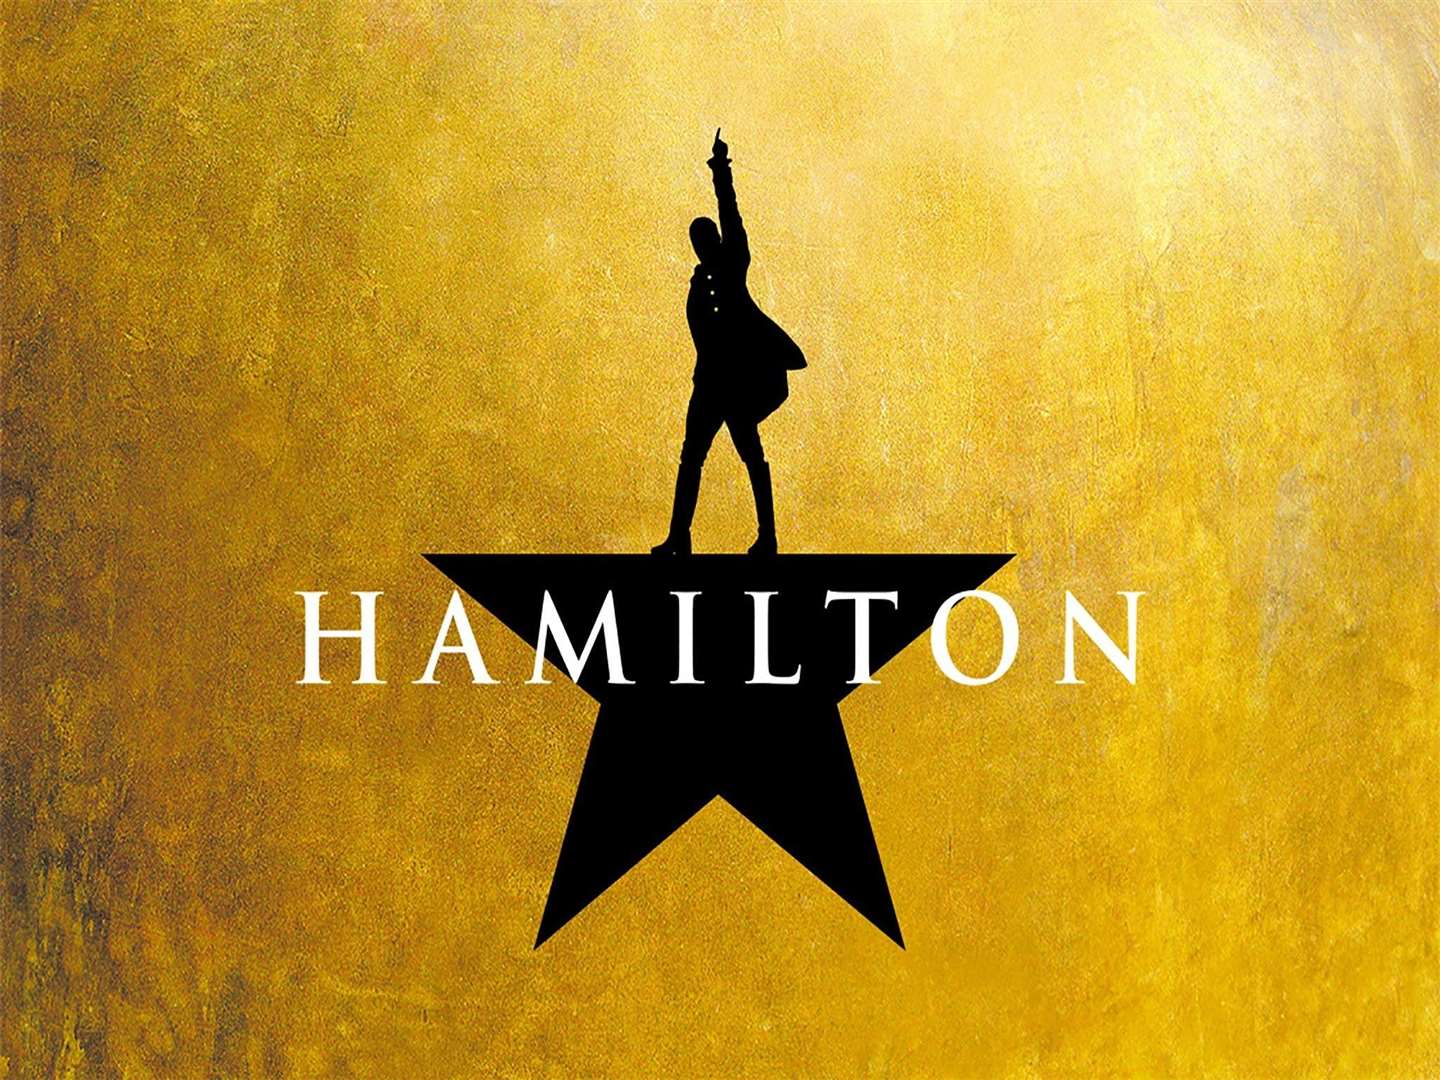 Hamilton has taken the world by storm since its debut in 2015